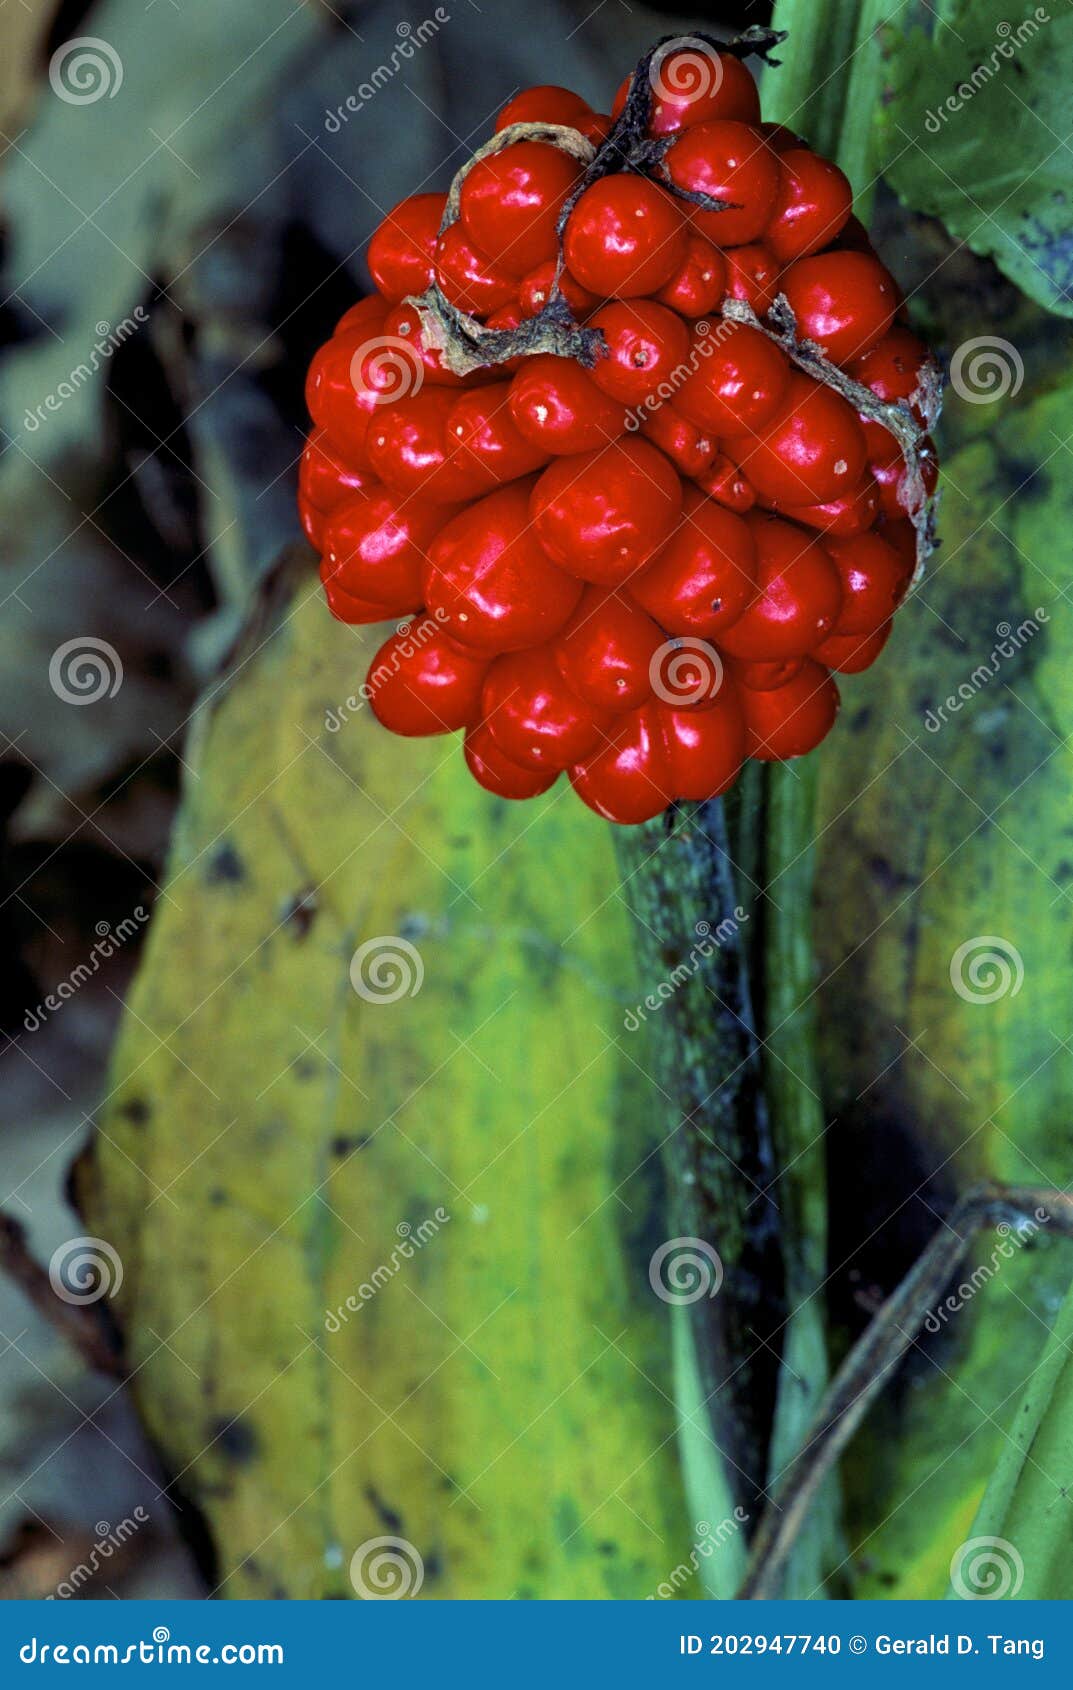 jack-in-the-pulpit fruits   33424